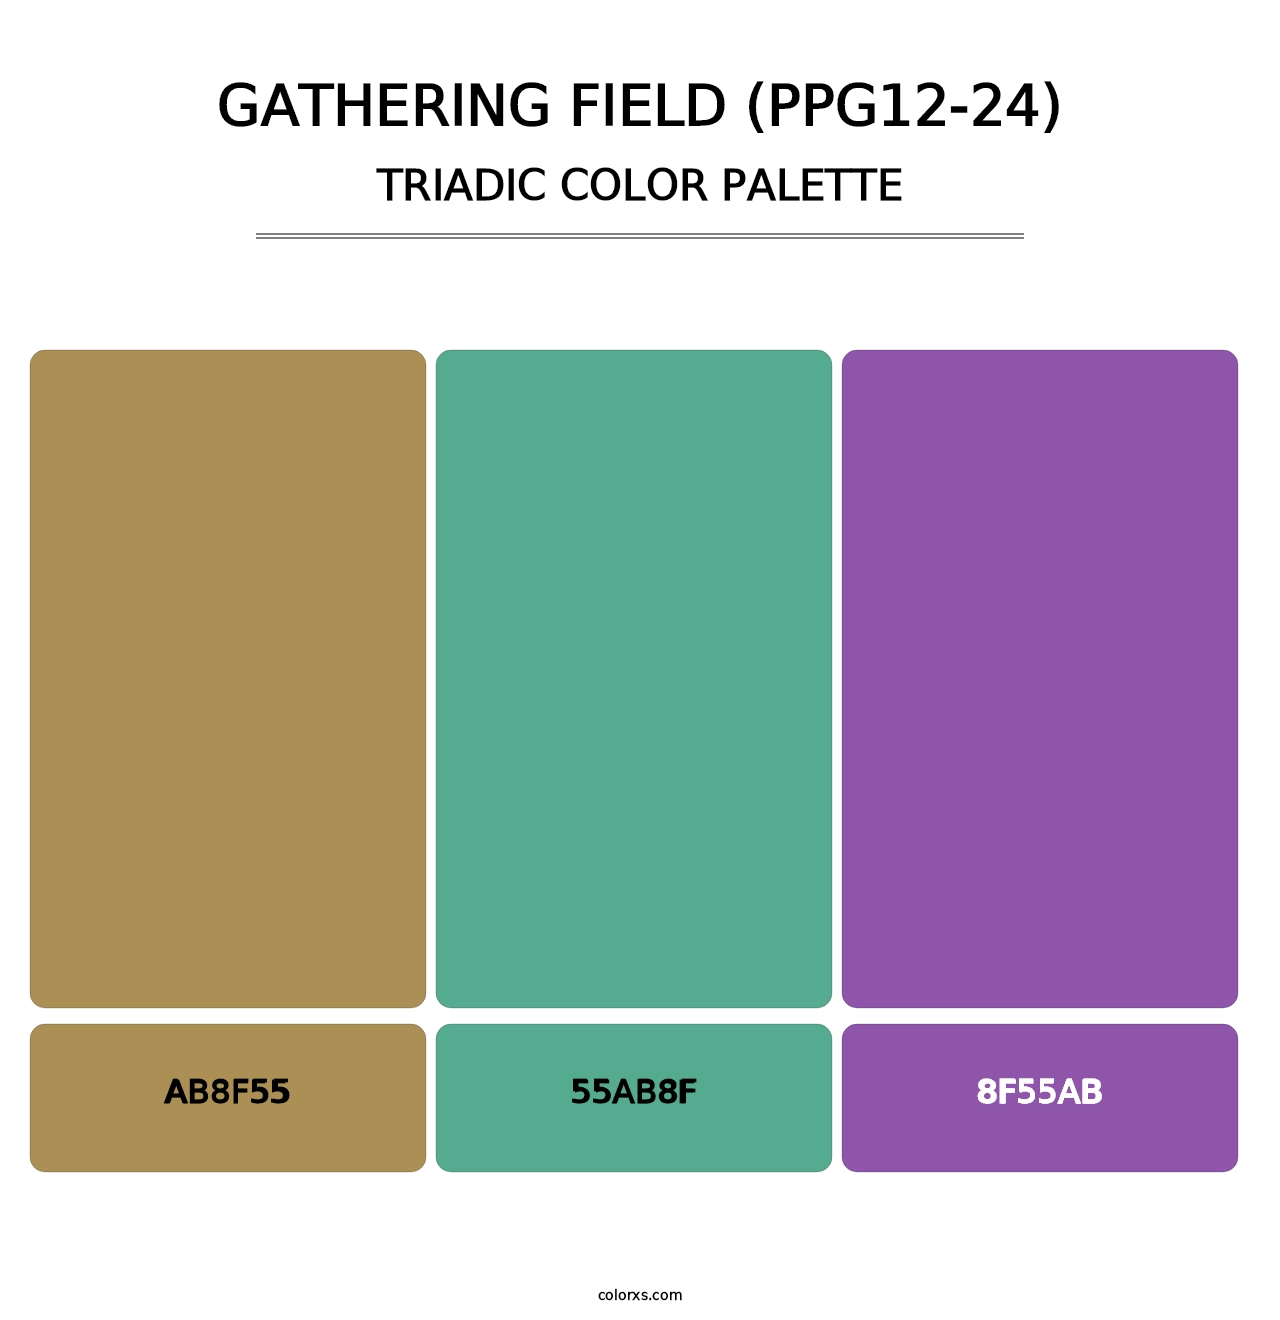 Gathering Field (PPG12-24) - Triadic Color Palette